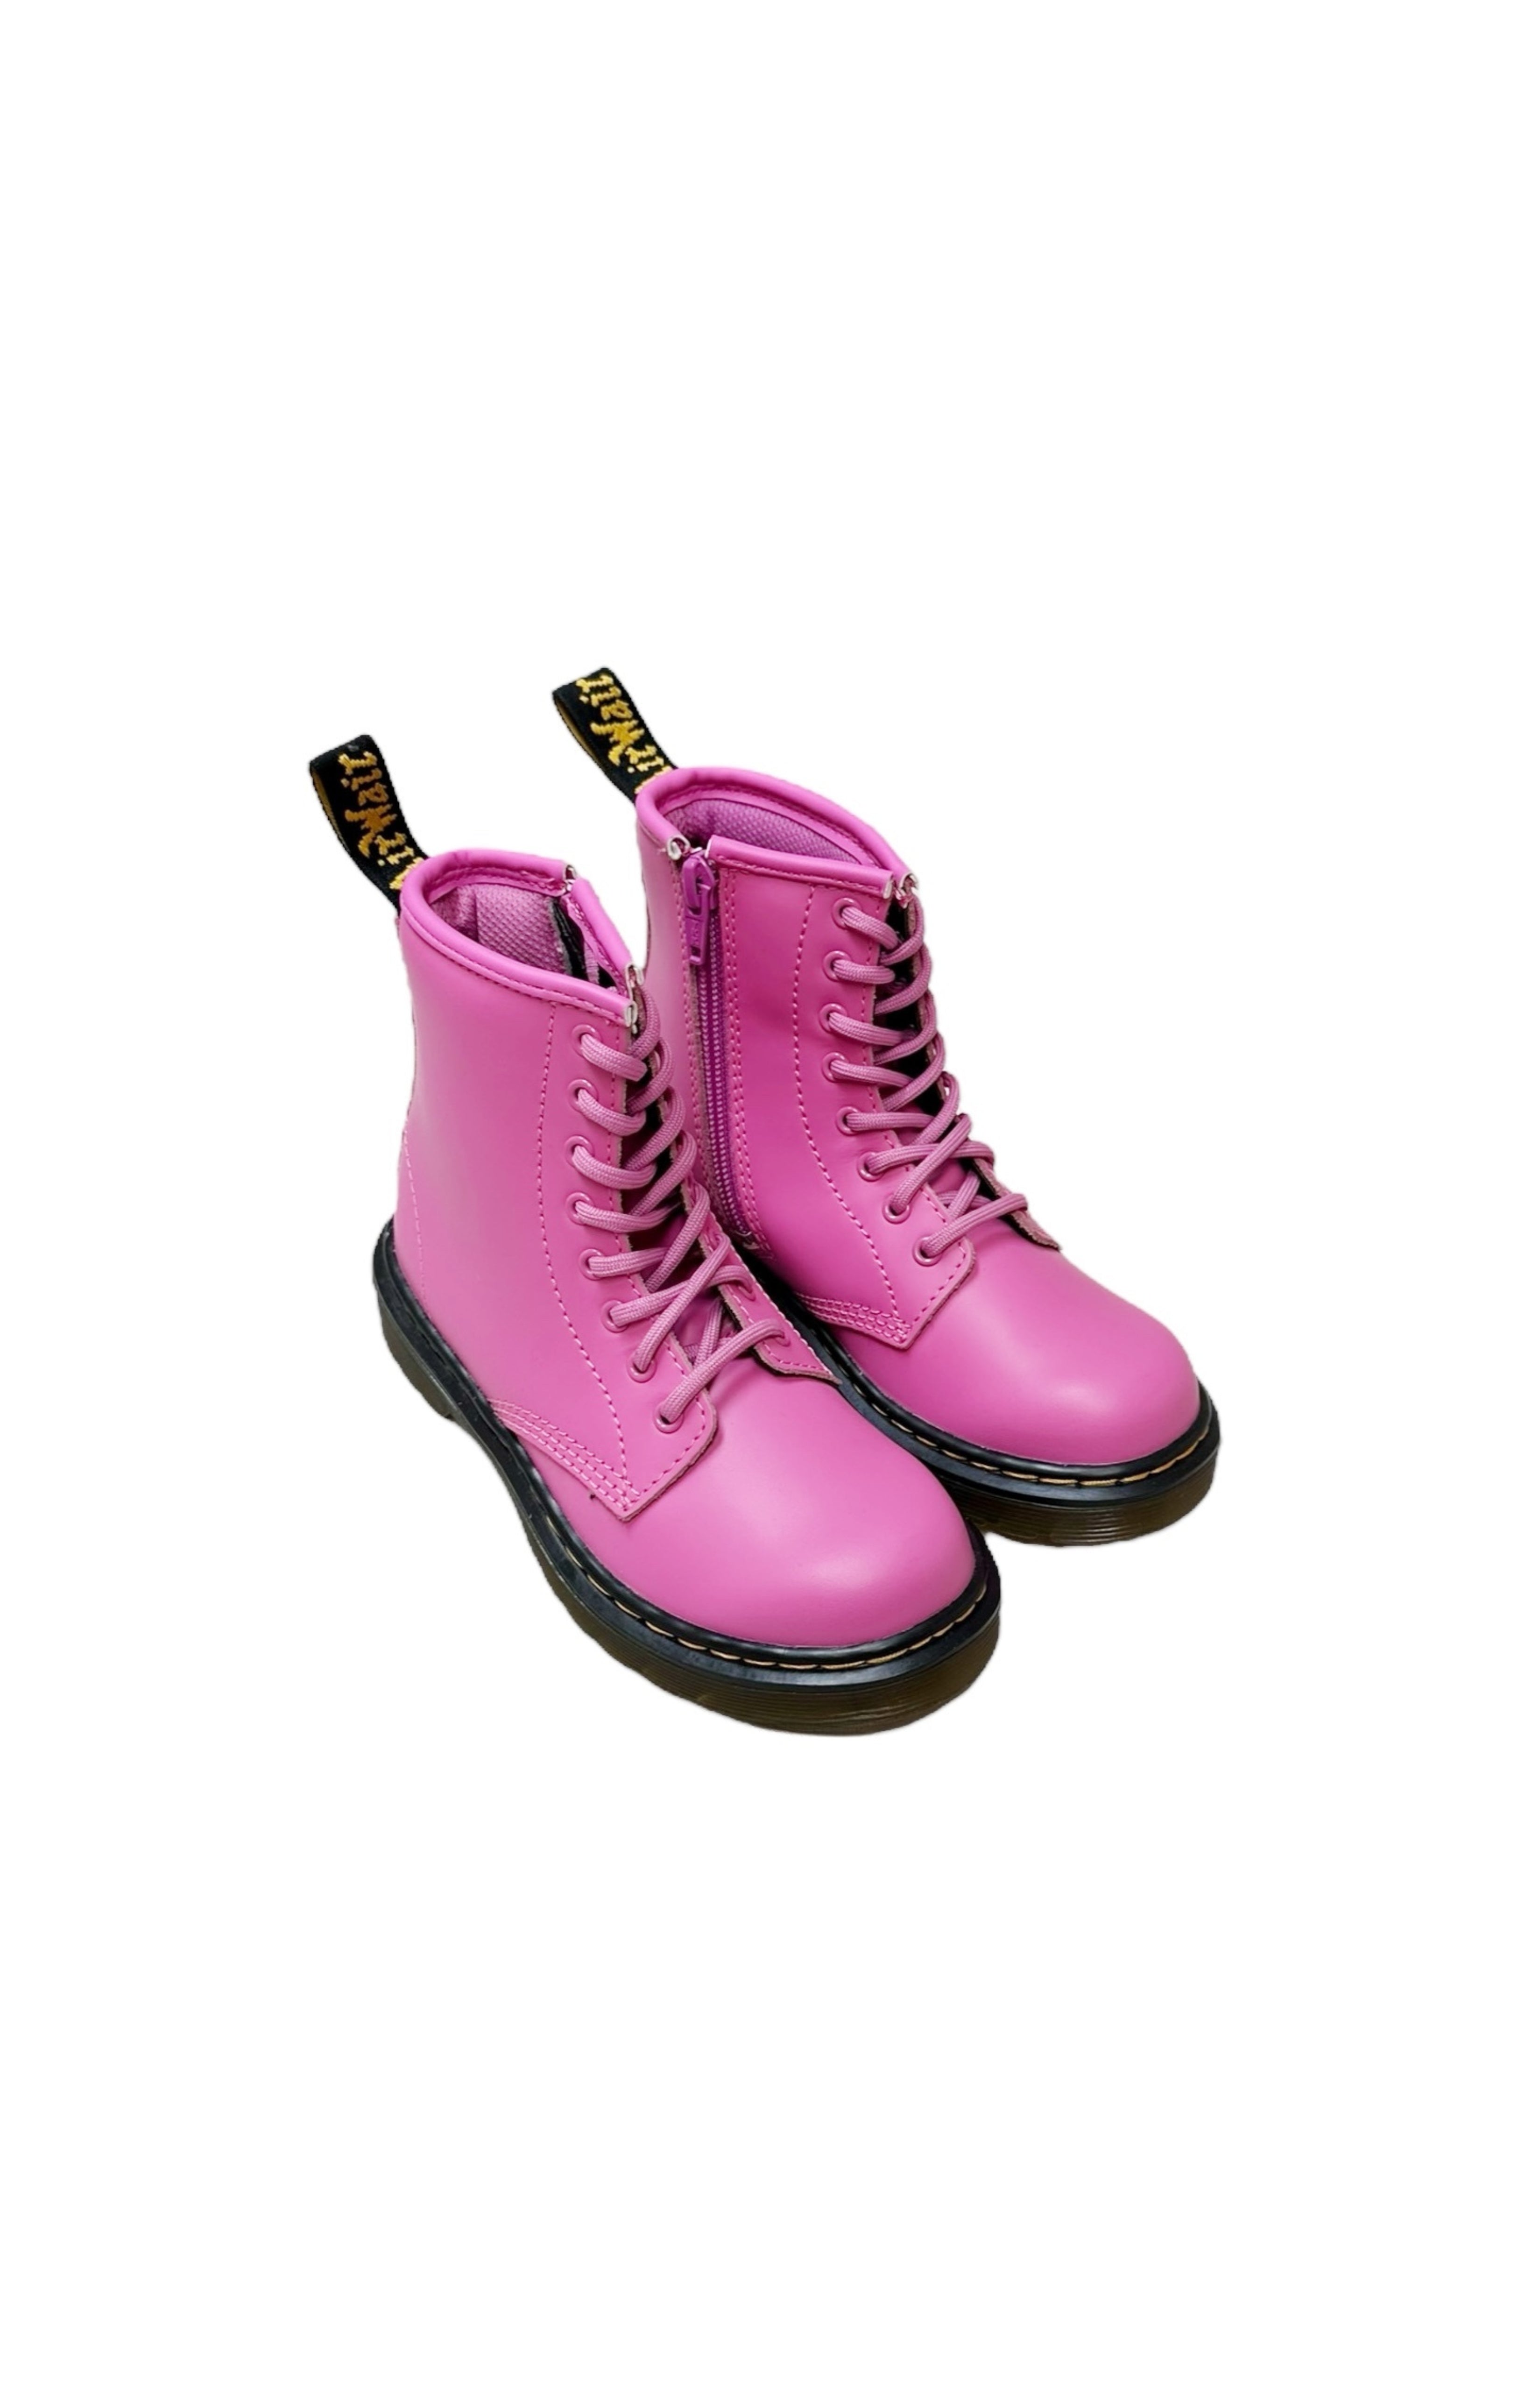 DR. MARTEN'S (NEW) Boots Size: Toddler US 13